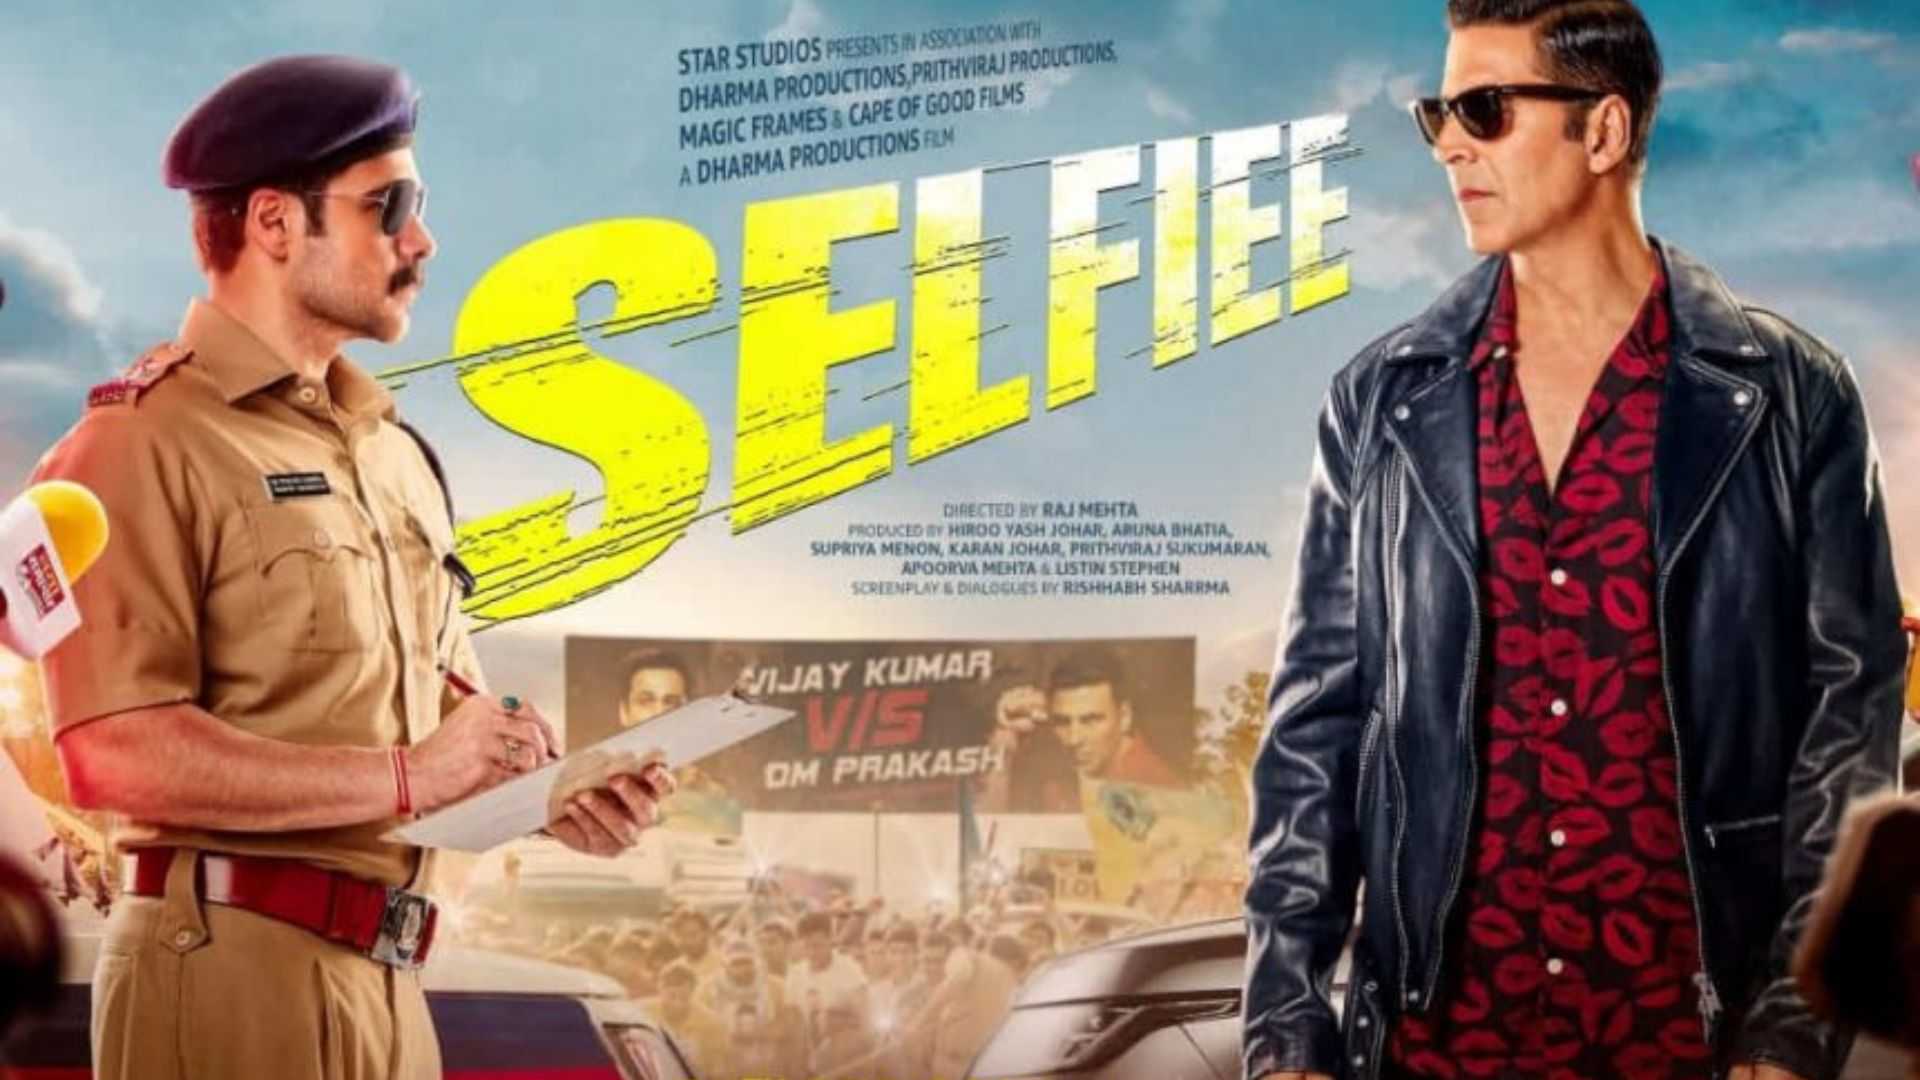 Selfiee box office collection: Akshay Kumar starrer struggles to pick up despite being a family entertainer, here's how much it minted on Day 2